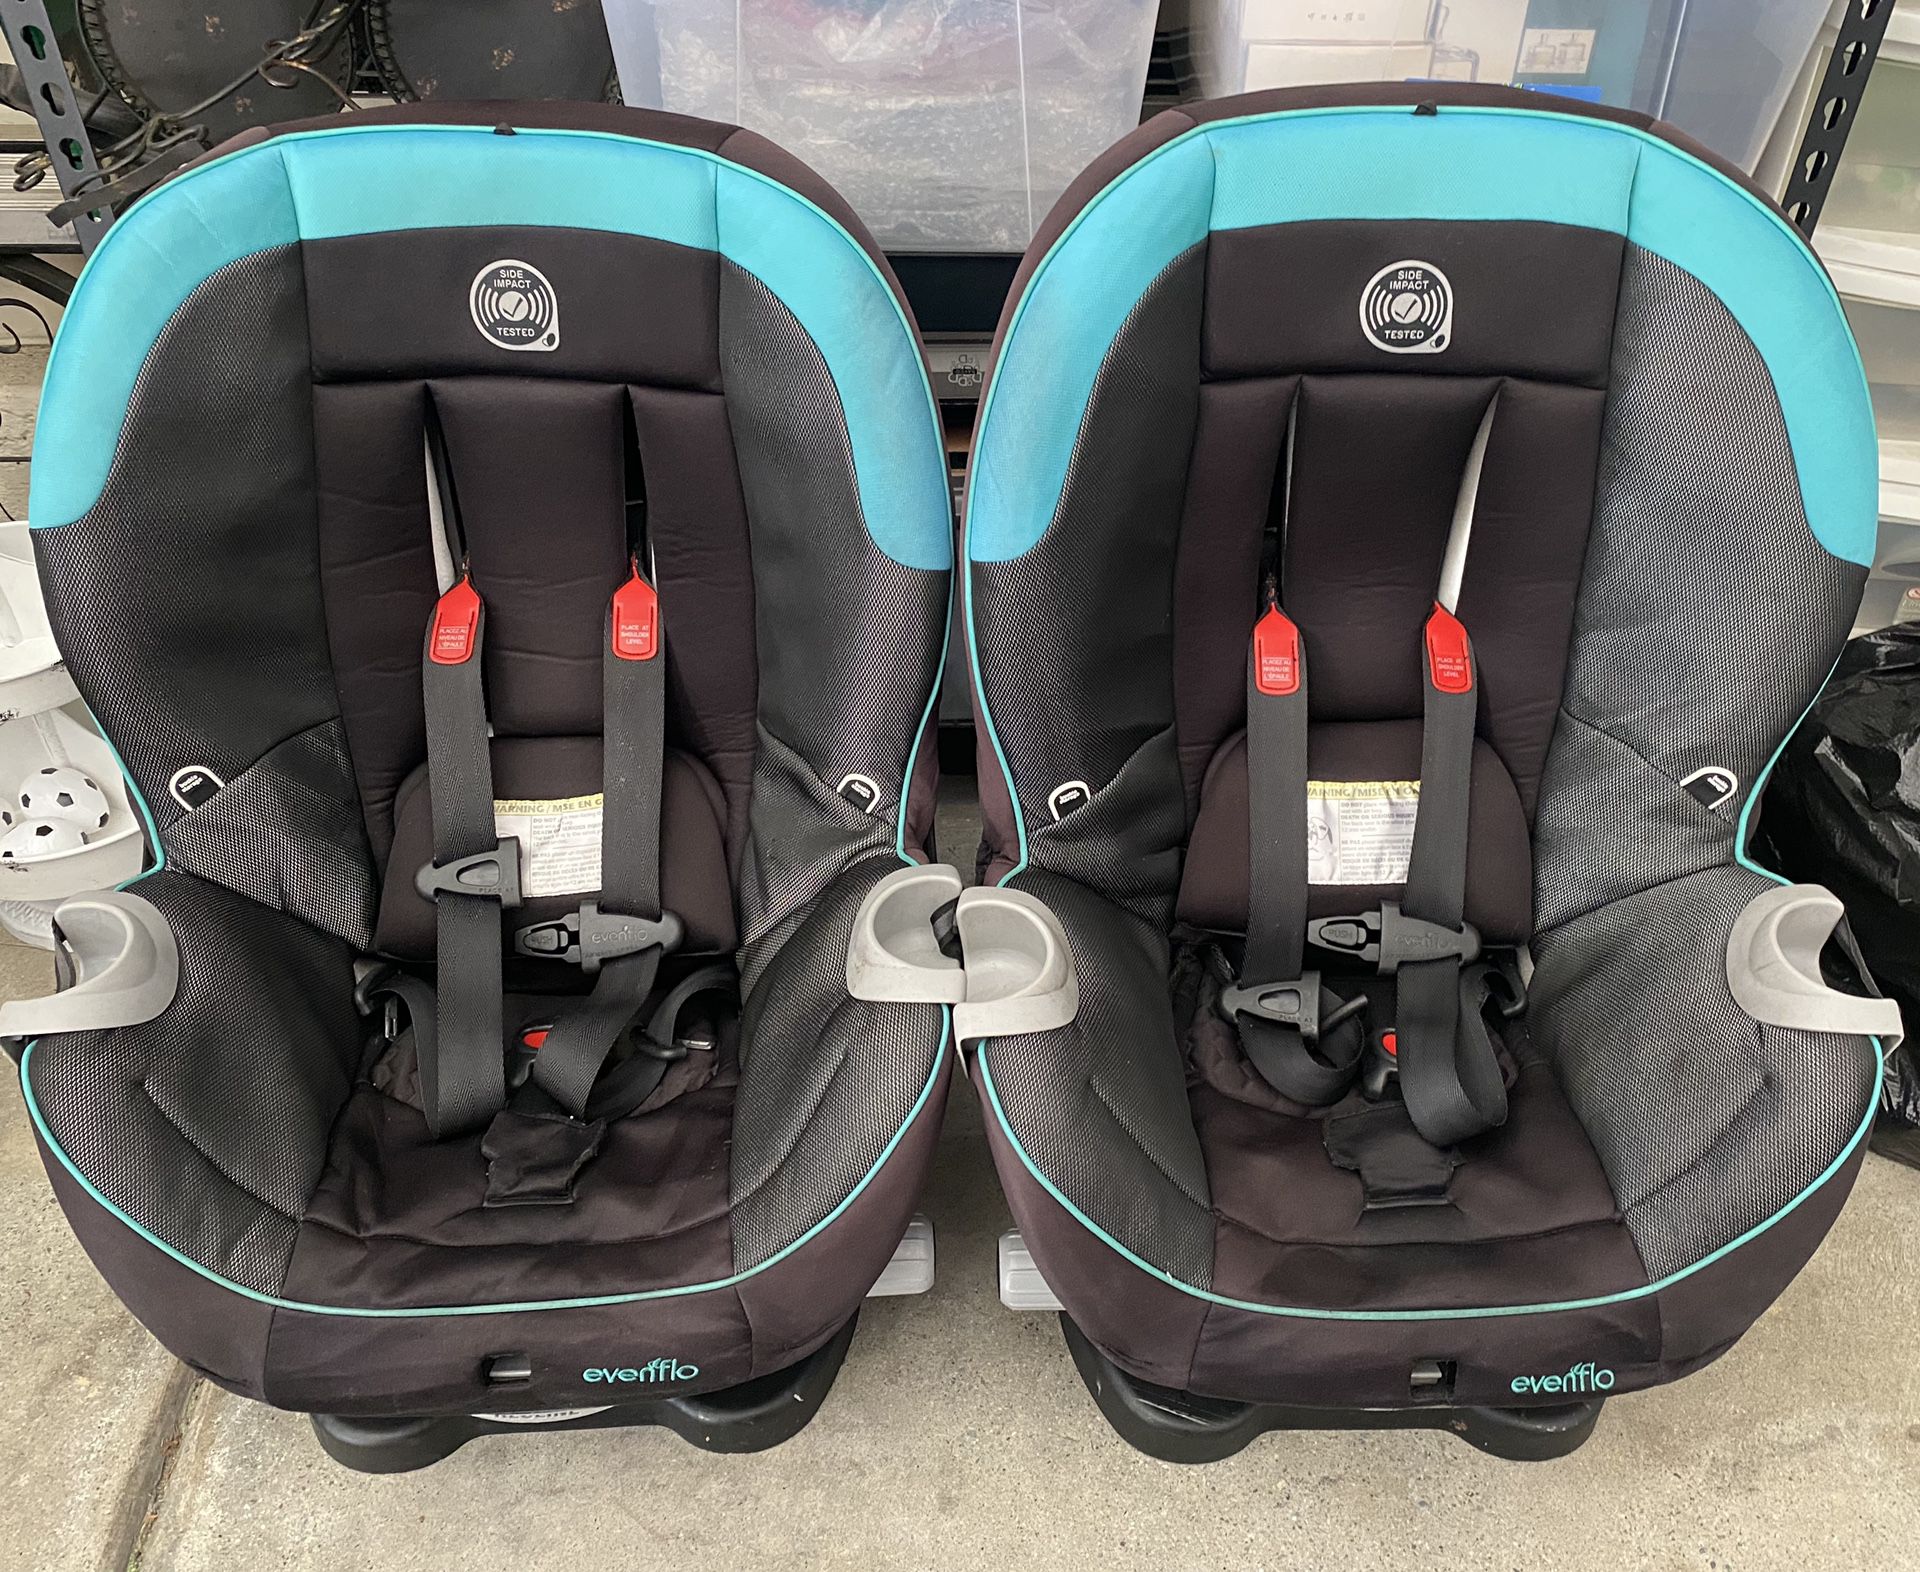 2 Evenflo Car seats for toddlers